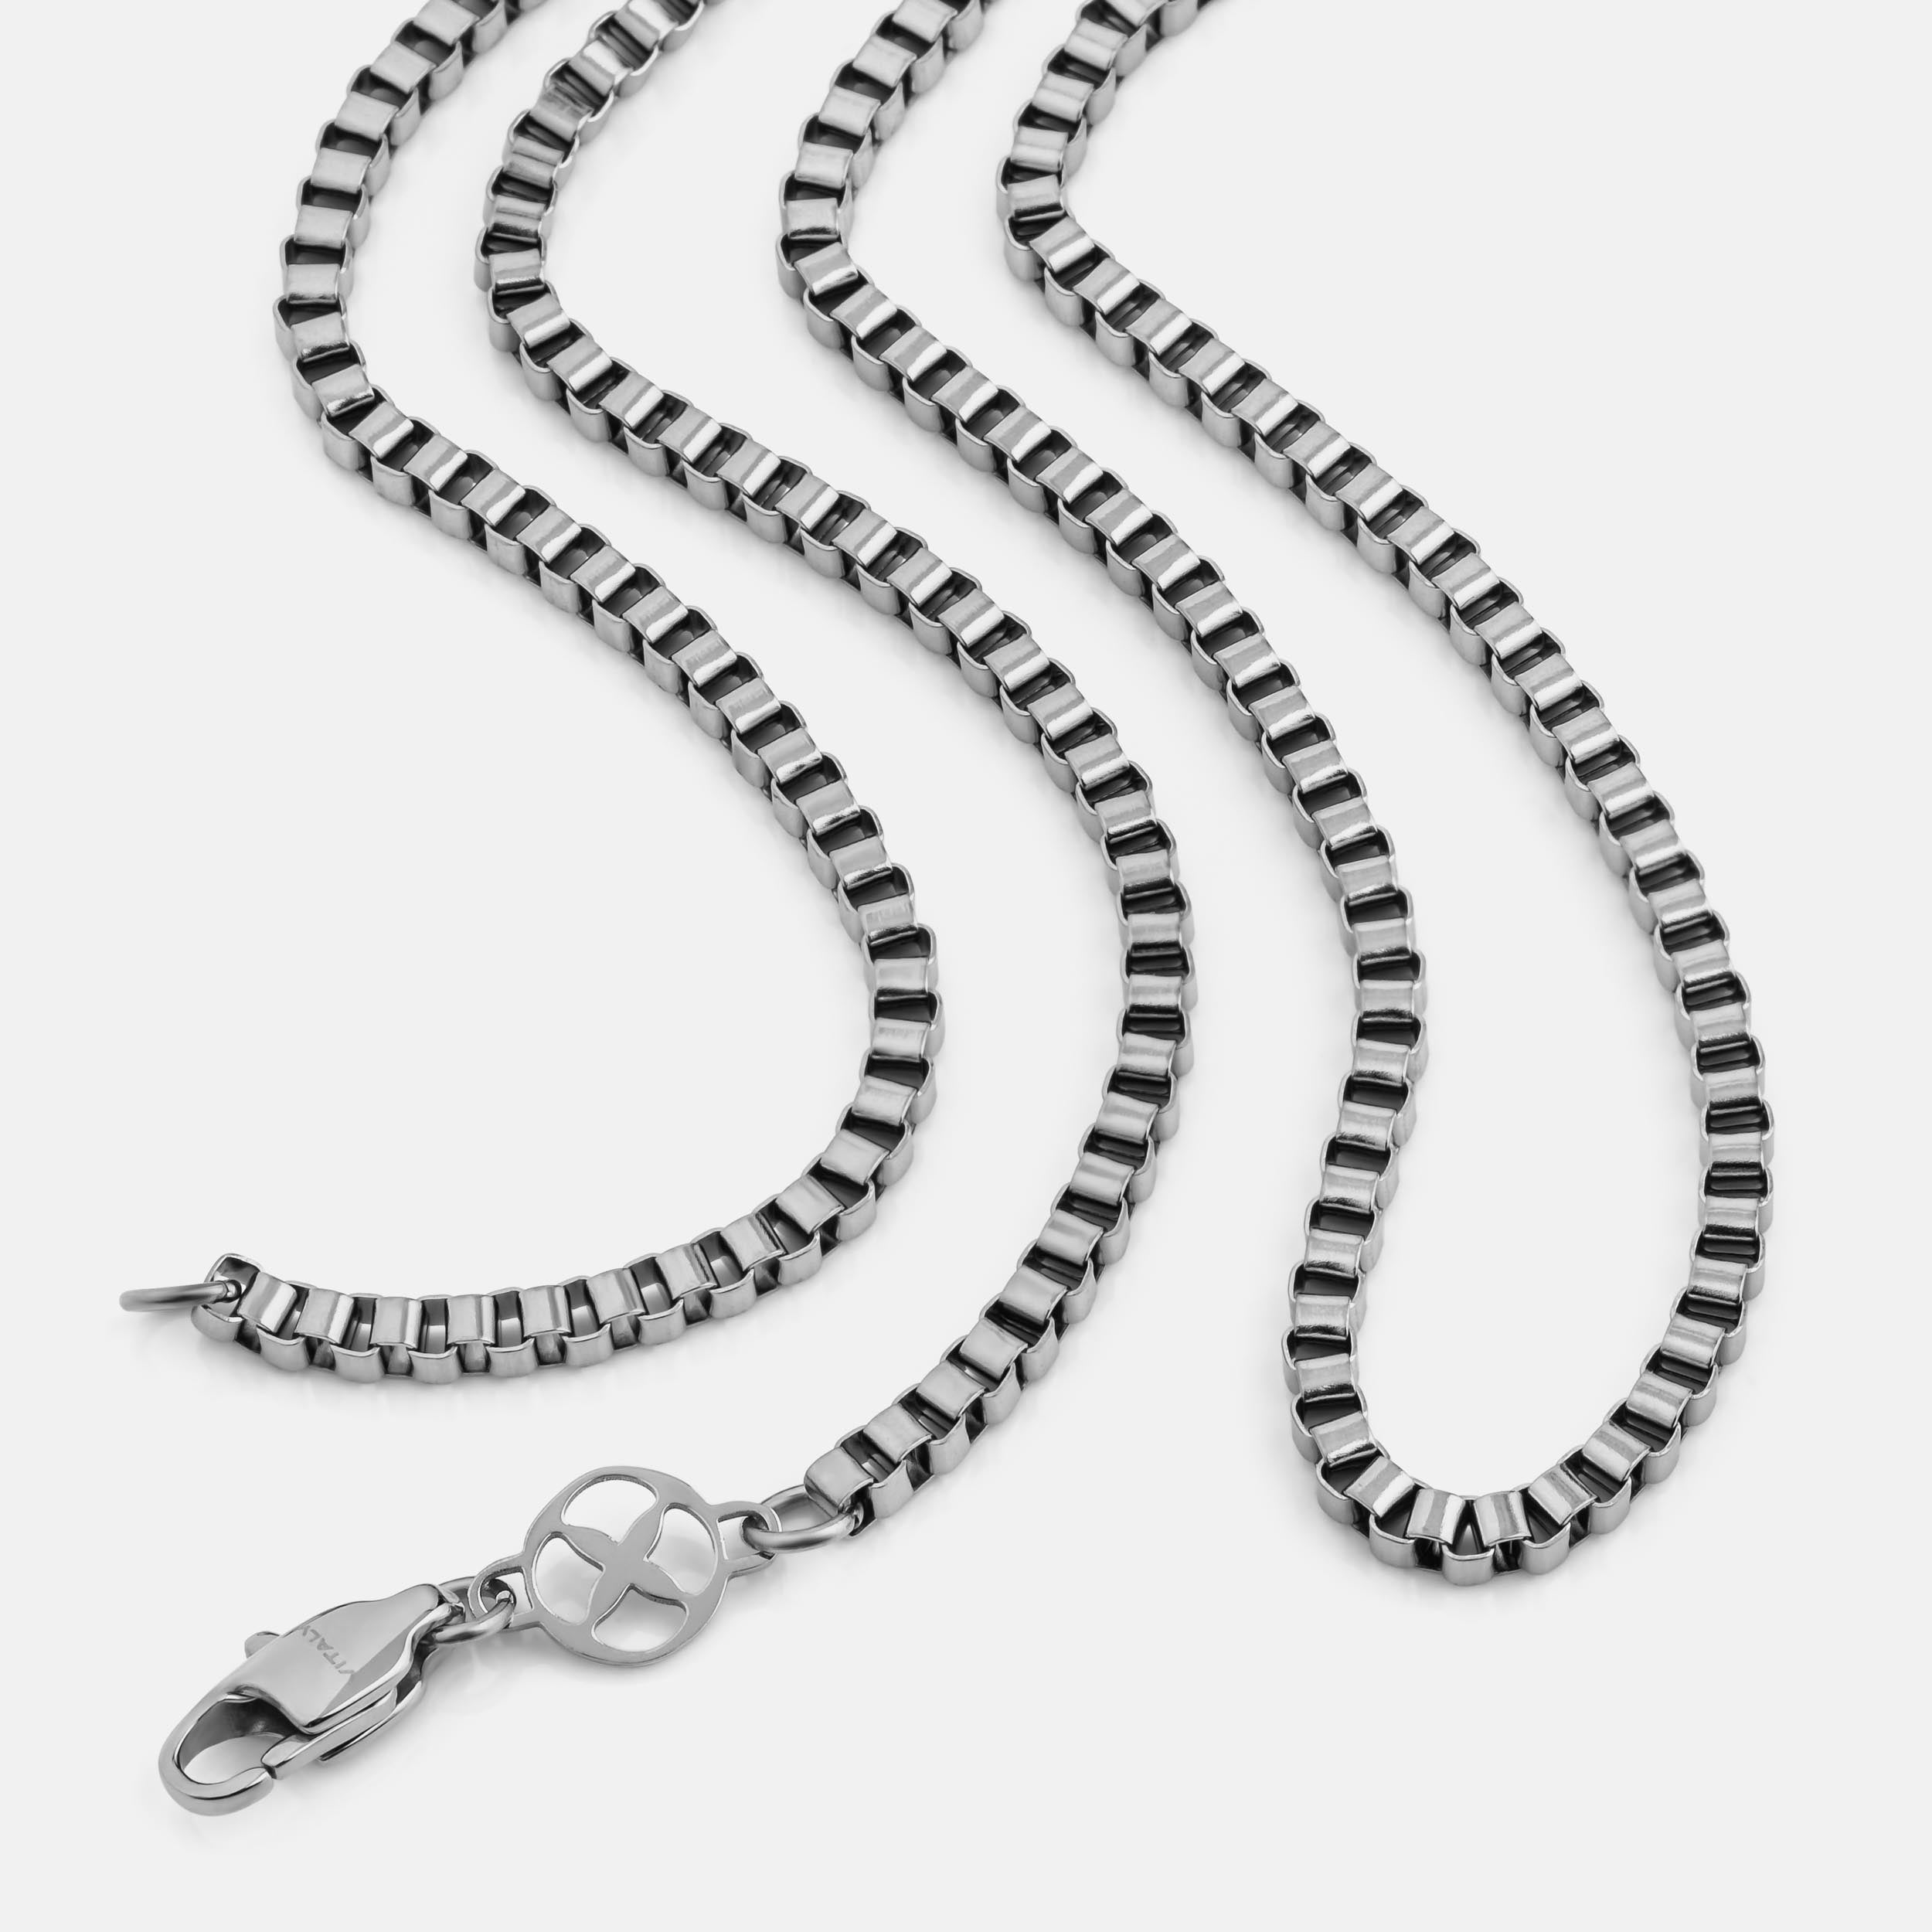 Stainless Steel Necklace 6 For Men price in Egypt